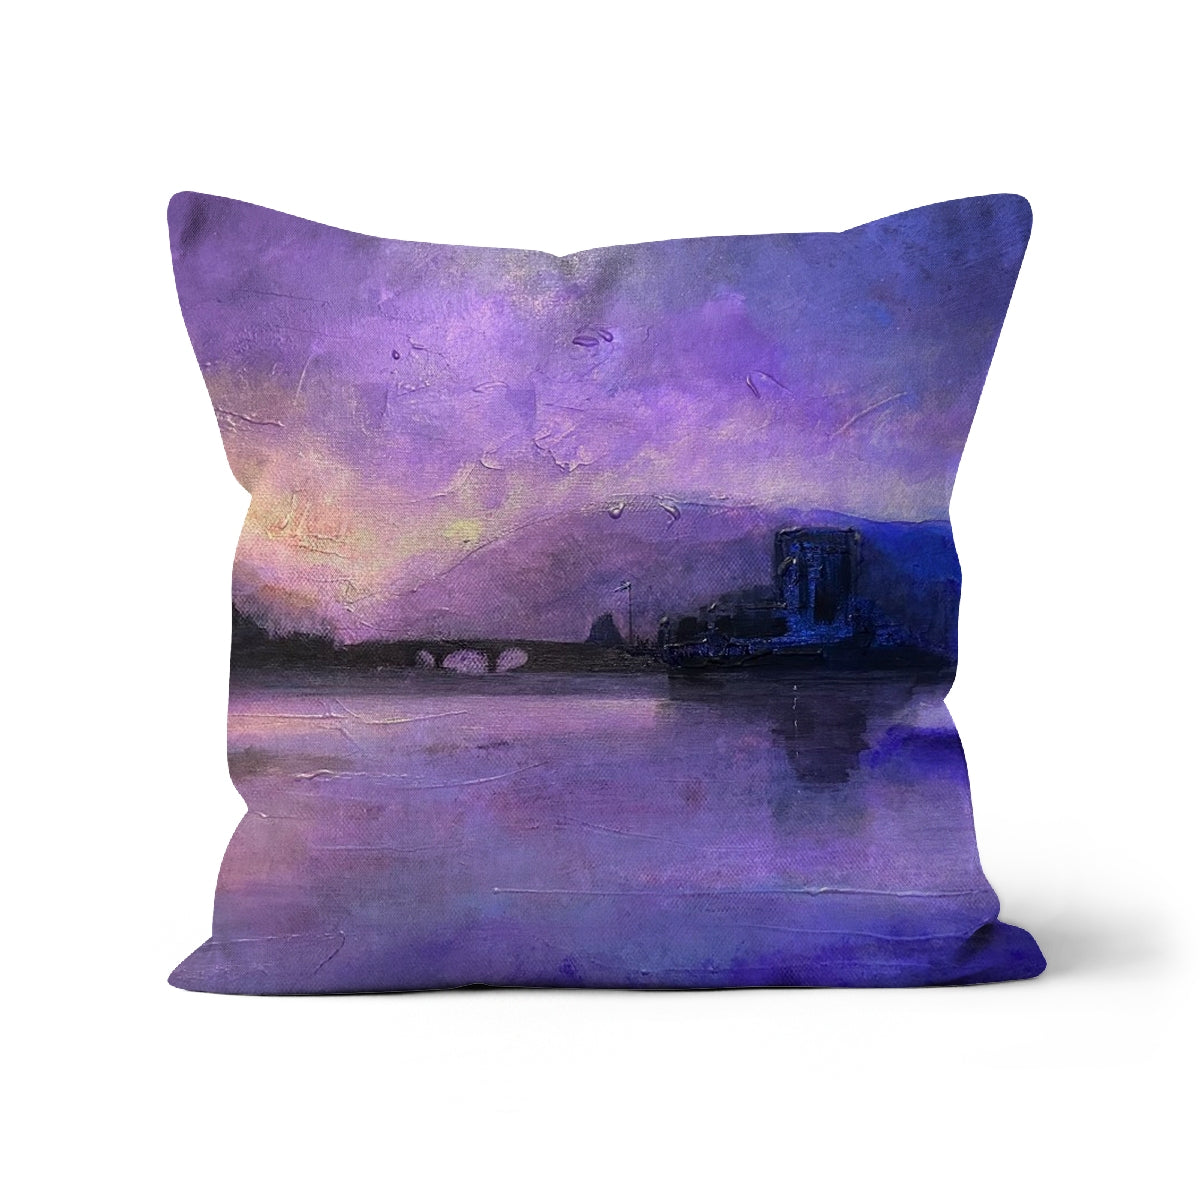 Eilean Donan Castle Moonset Art Gifts Cushion-Cushions-Historic & Iconic Scotland Art Gallery-Linen-22"x22"-Paintings, Prints, Homeware, Art Gifts From Scotland By Scottish Artist Kevin Hunter